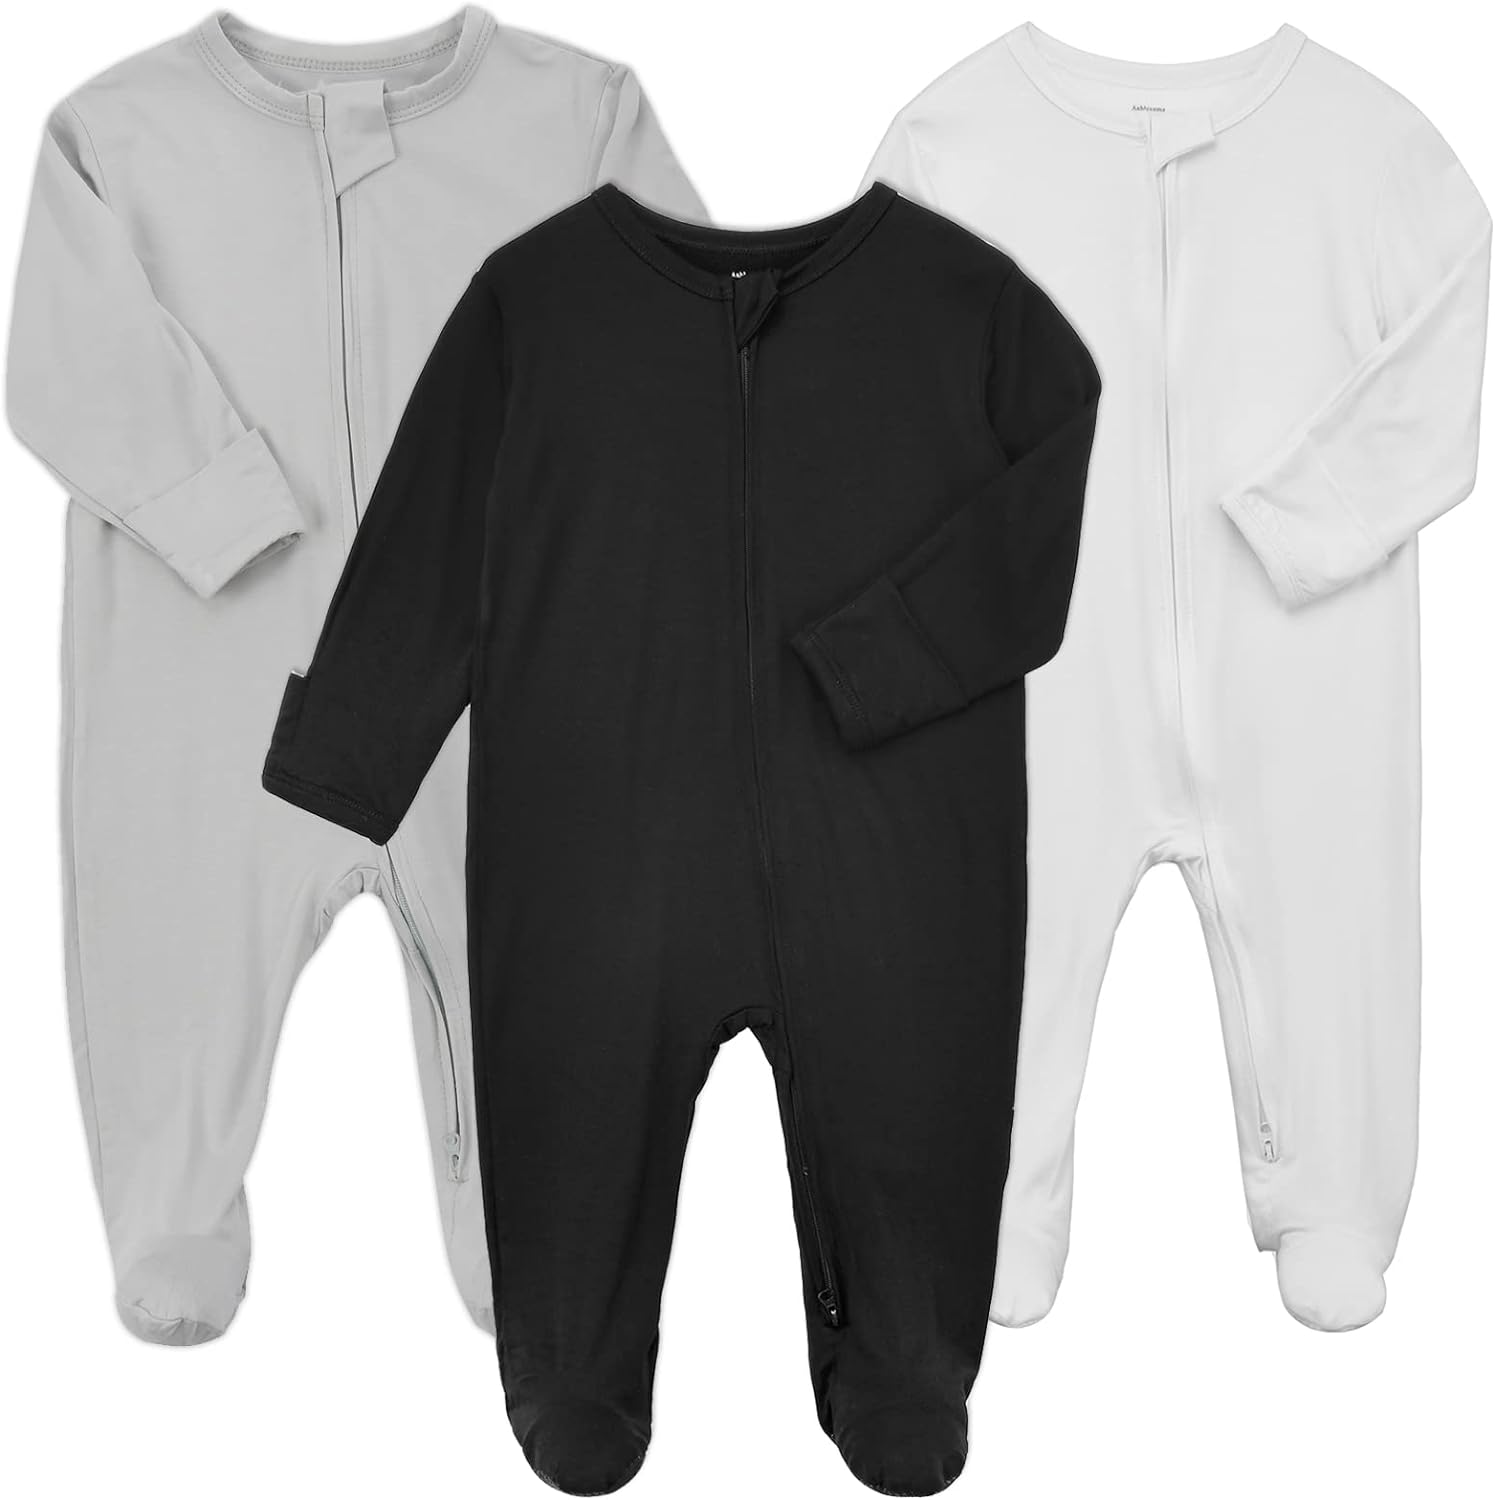 Limited Stock - Aablexema Baby Zipper Pajamas Bamboo Rayon, 3pcs Unisex Infant Onesies with Mitten Long Sleeve Footed Pjs - Sale Now On